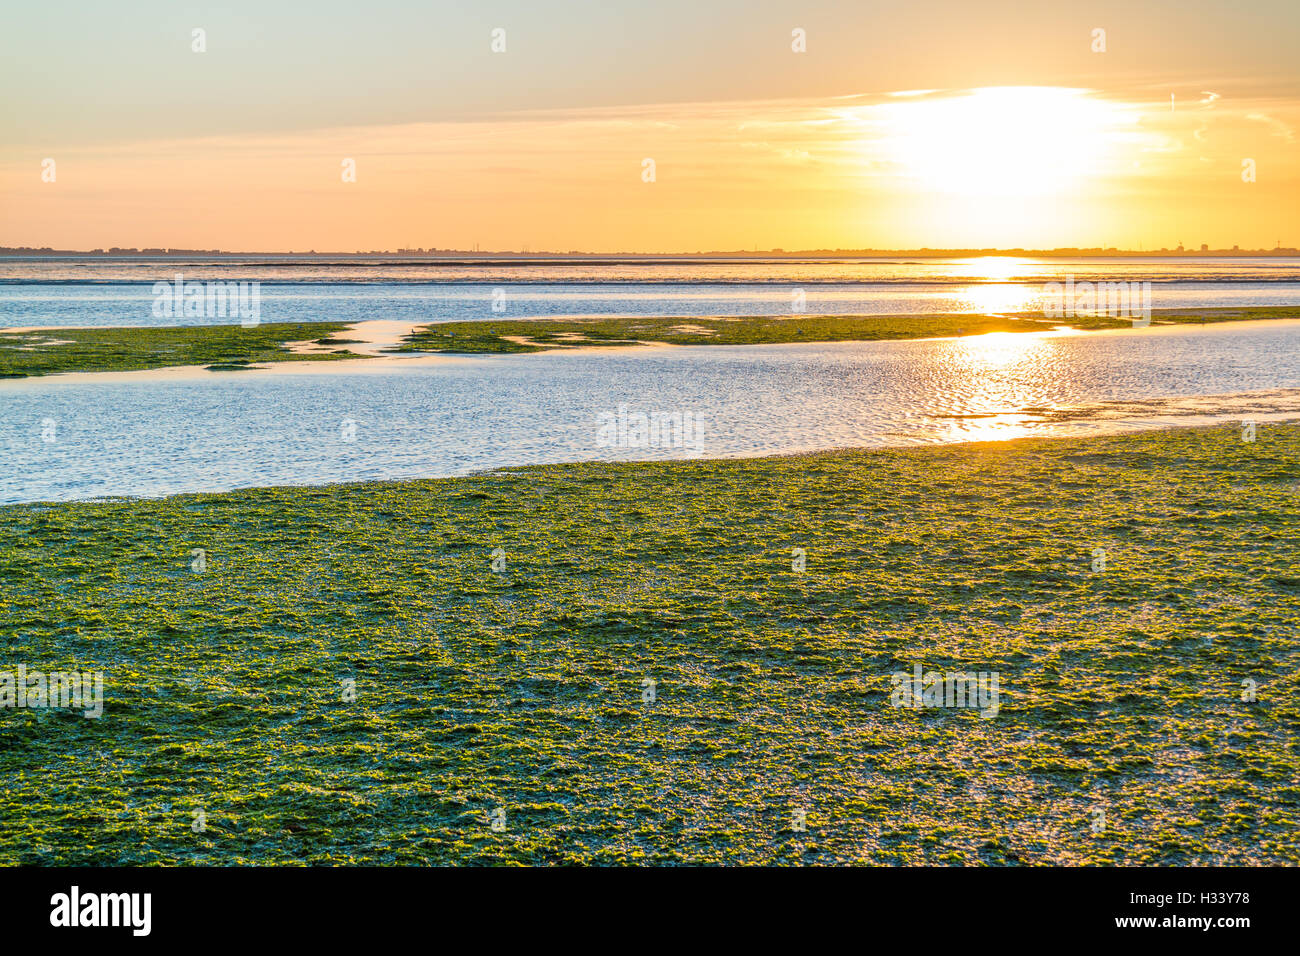 Sunset over sea lettuce field on saltwater tidal flats at low tide of Waddensea, Netherlands Stock Photo